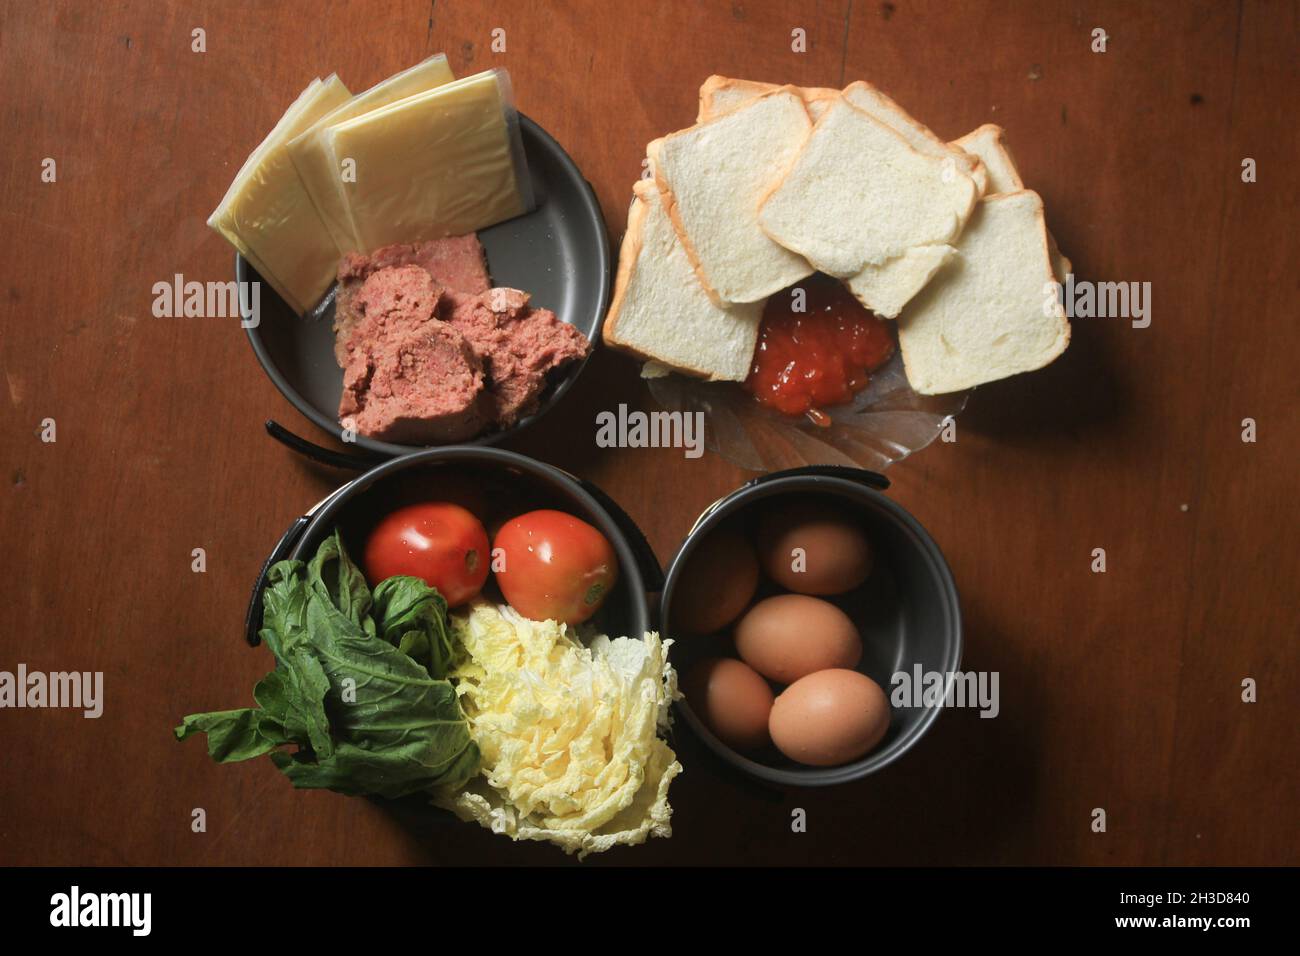 a healthy diet consisting of minced beef, sliced fragrant white bread, sauce, fresh chicken eggs, cheese, mustard greens, and tomatoes. Stock Photo